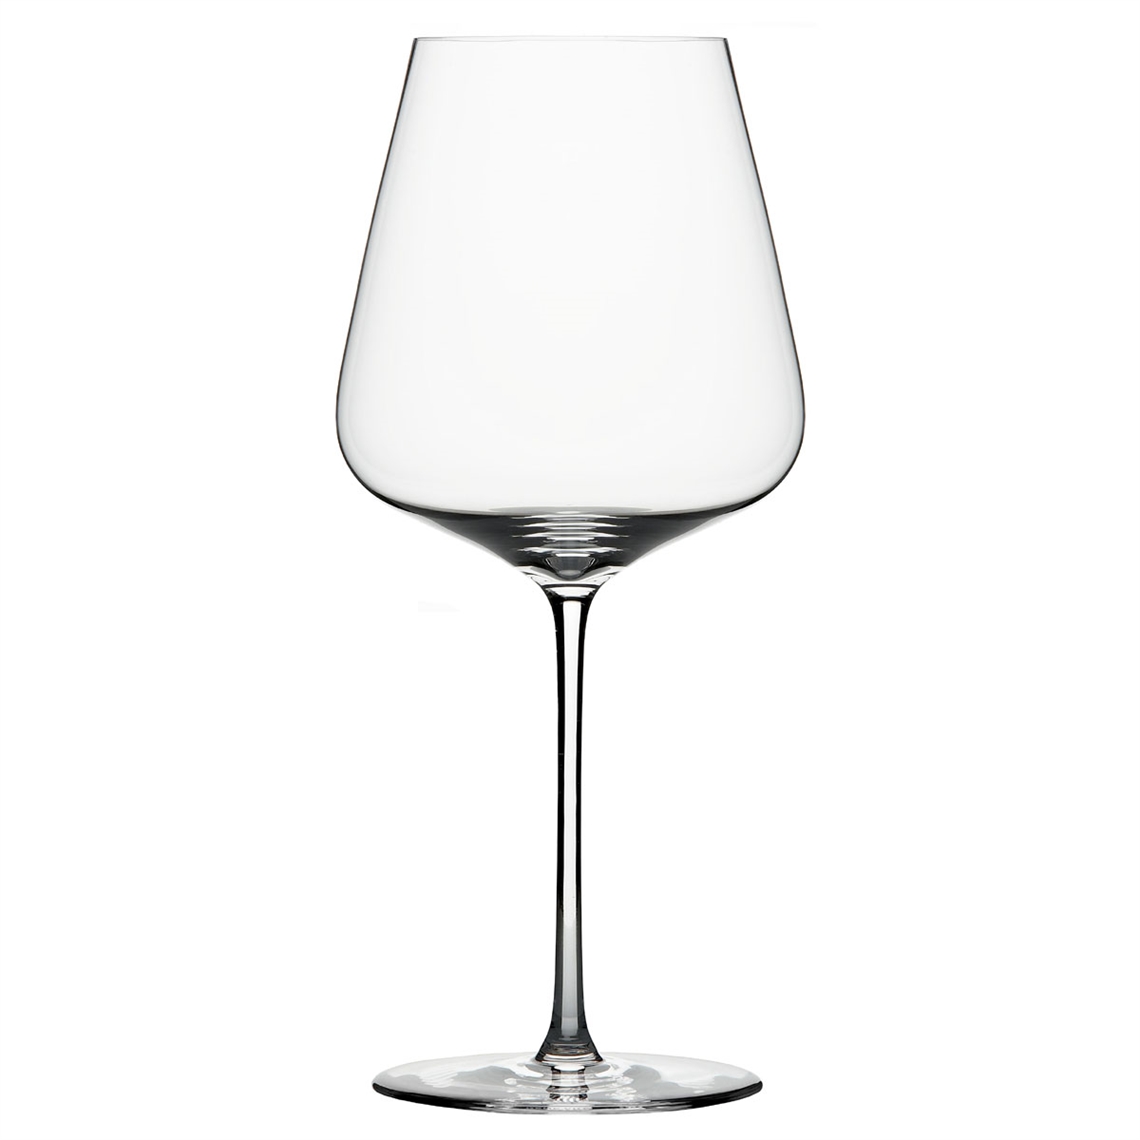 View more glass and co from our Premium Mouth Blown Glassware range